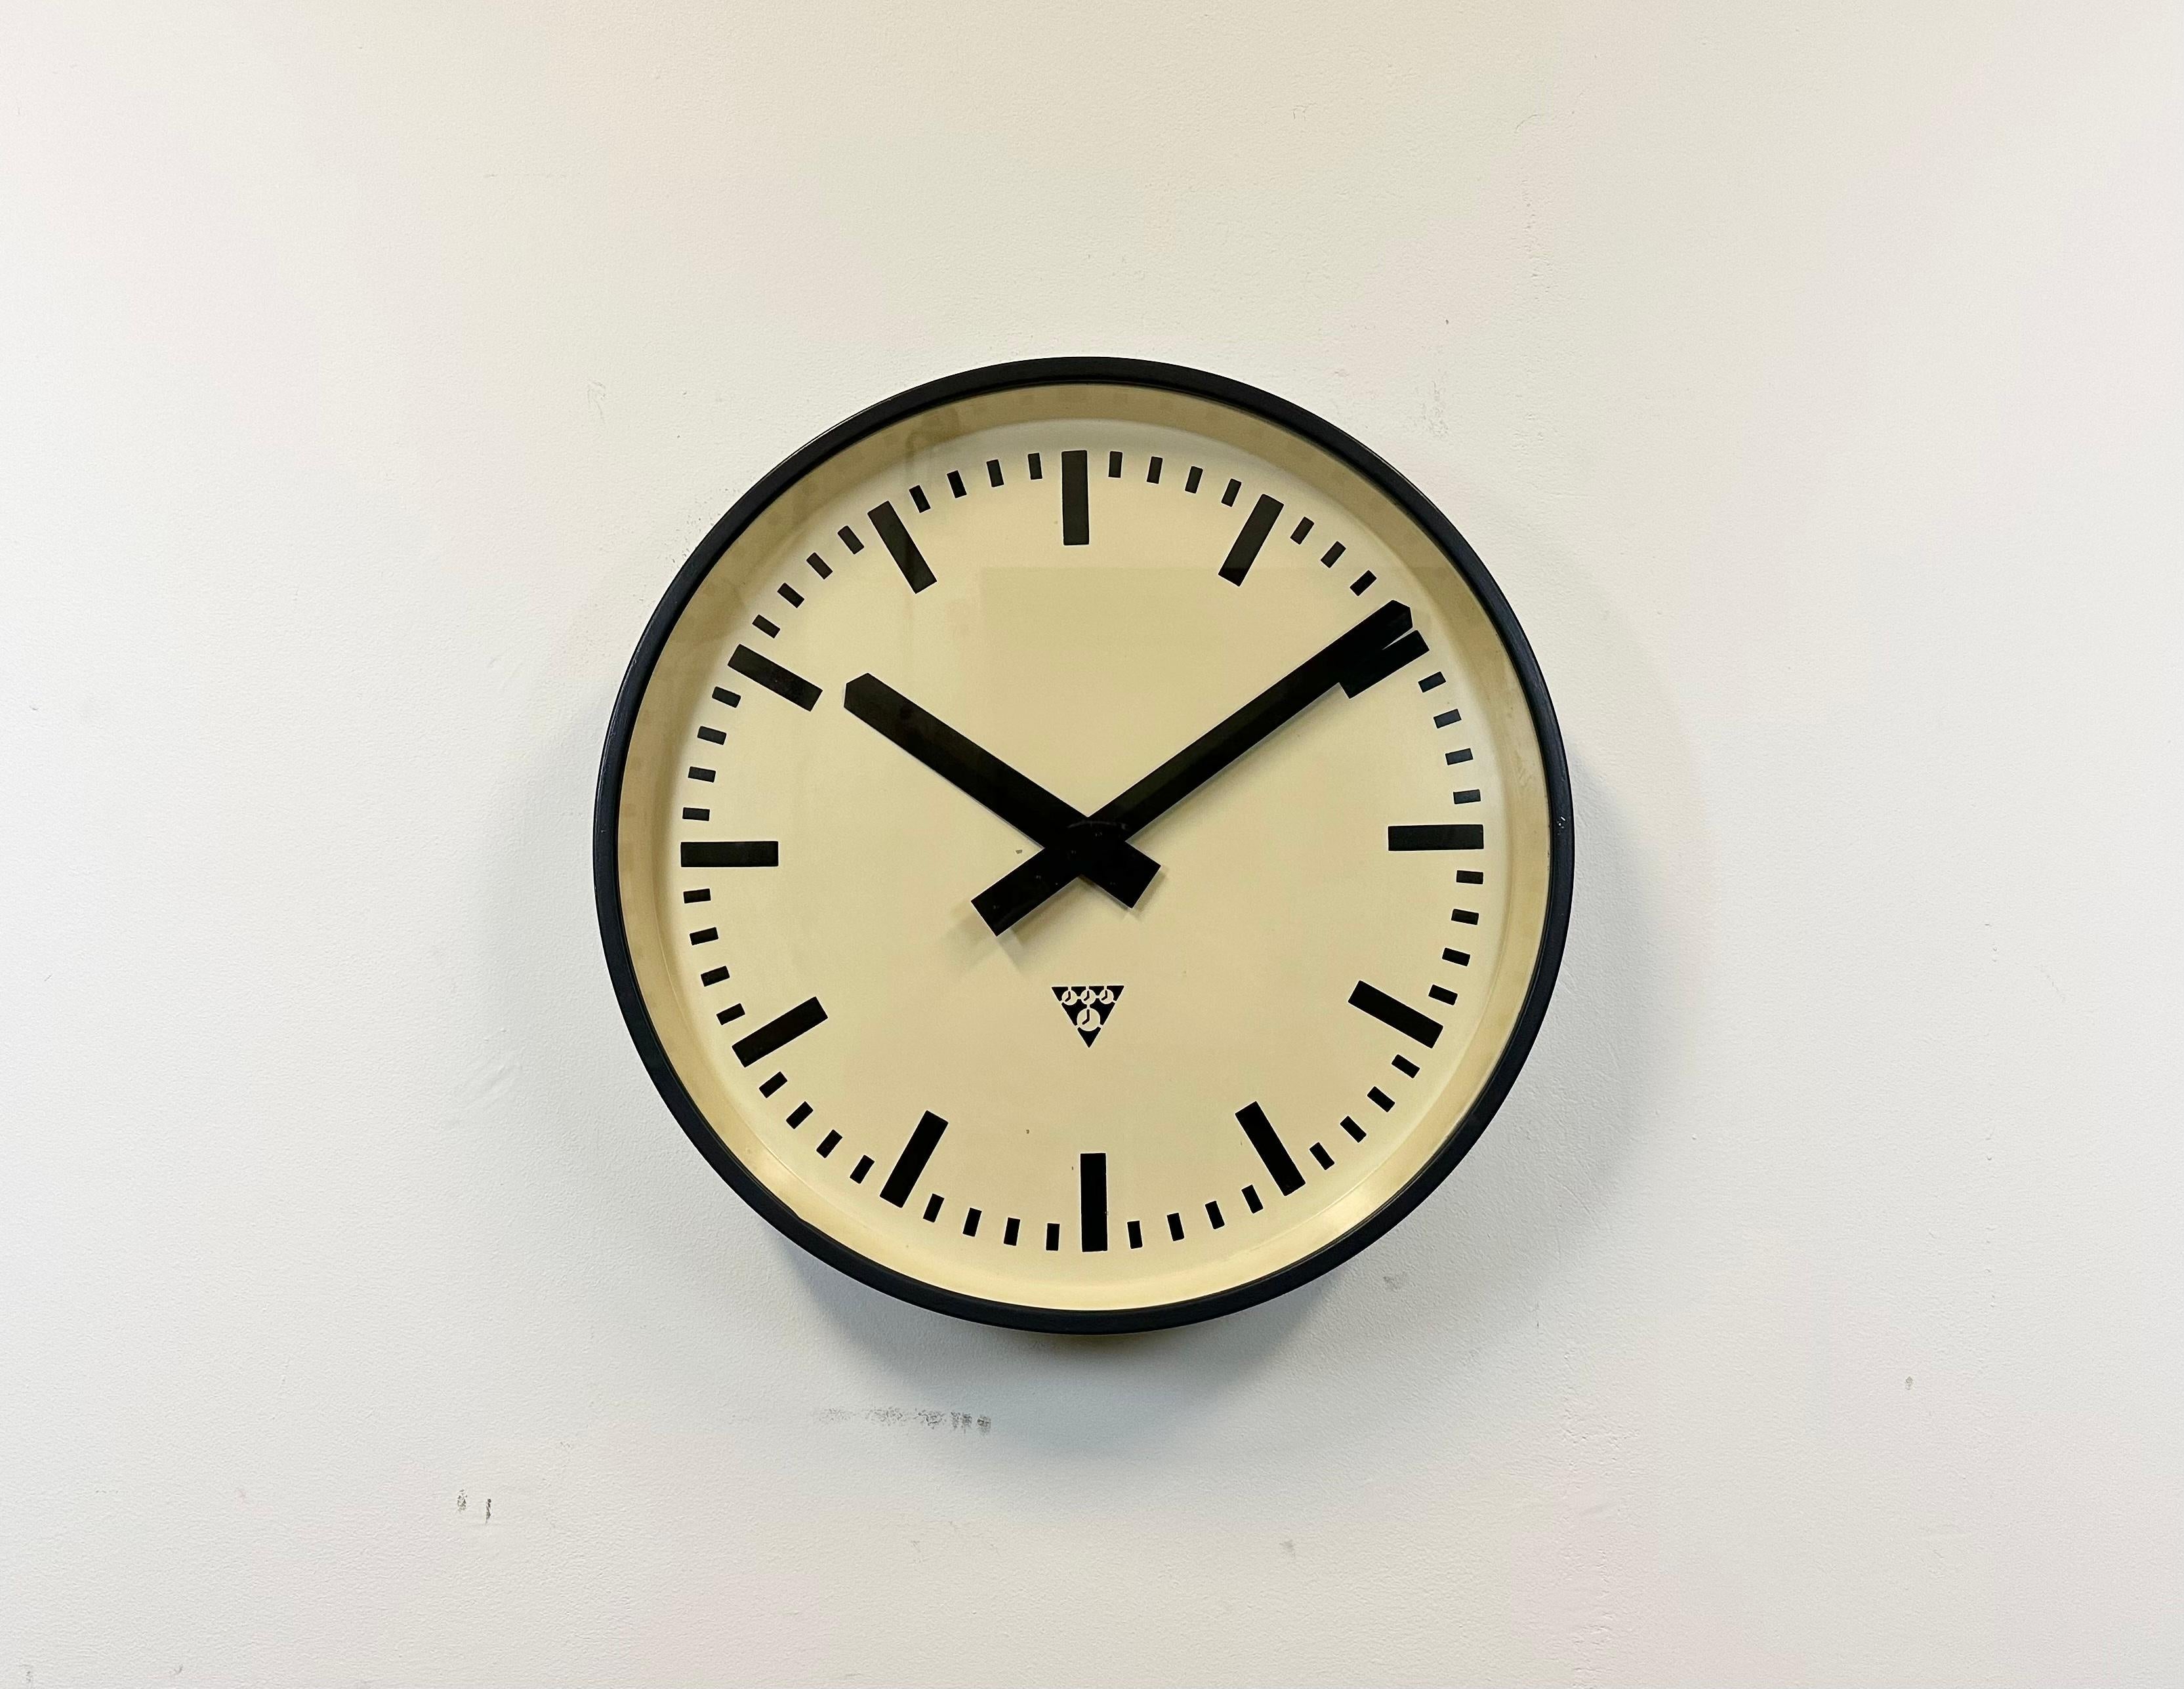 This wall clock was produced by Pragotron in former Czechoslovakia during the 1960s. It features a dark grey metal frame, an iron dial, an aluminium hands and a clear glass cover. The piece has been converted into a battery-powered clockwork and